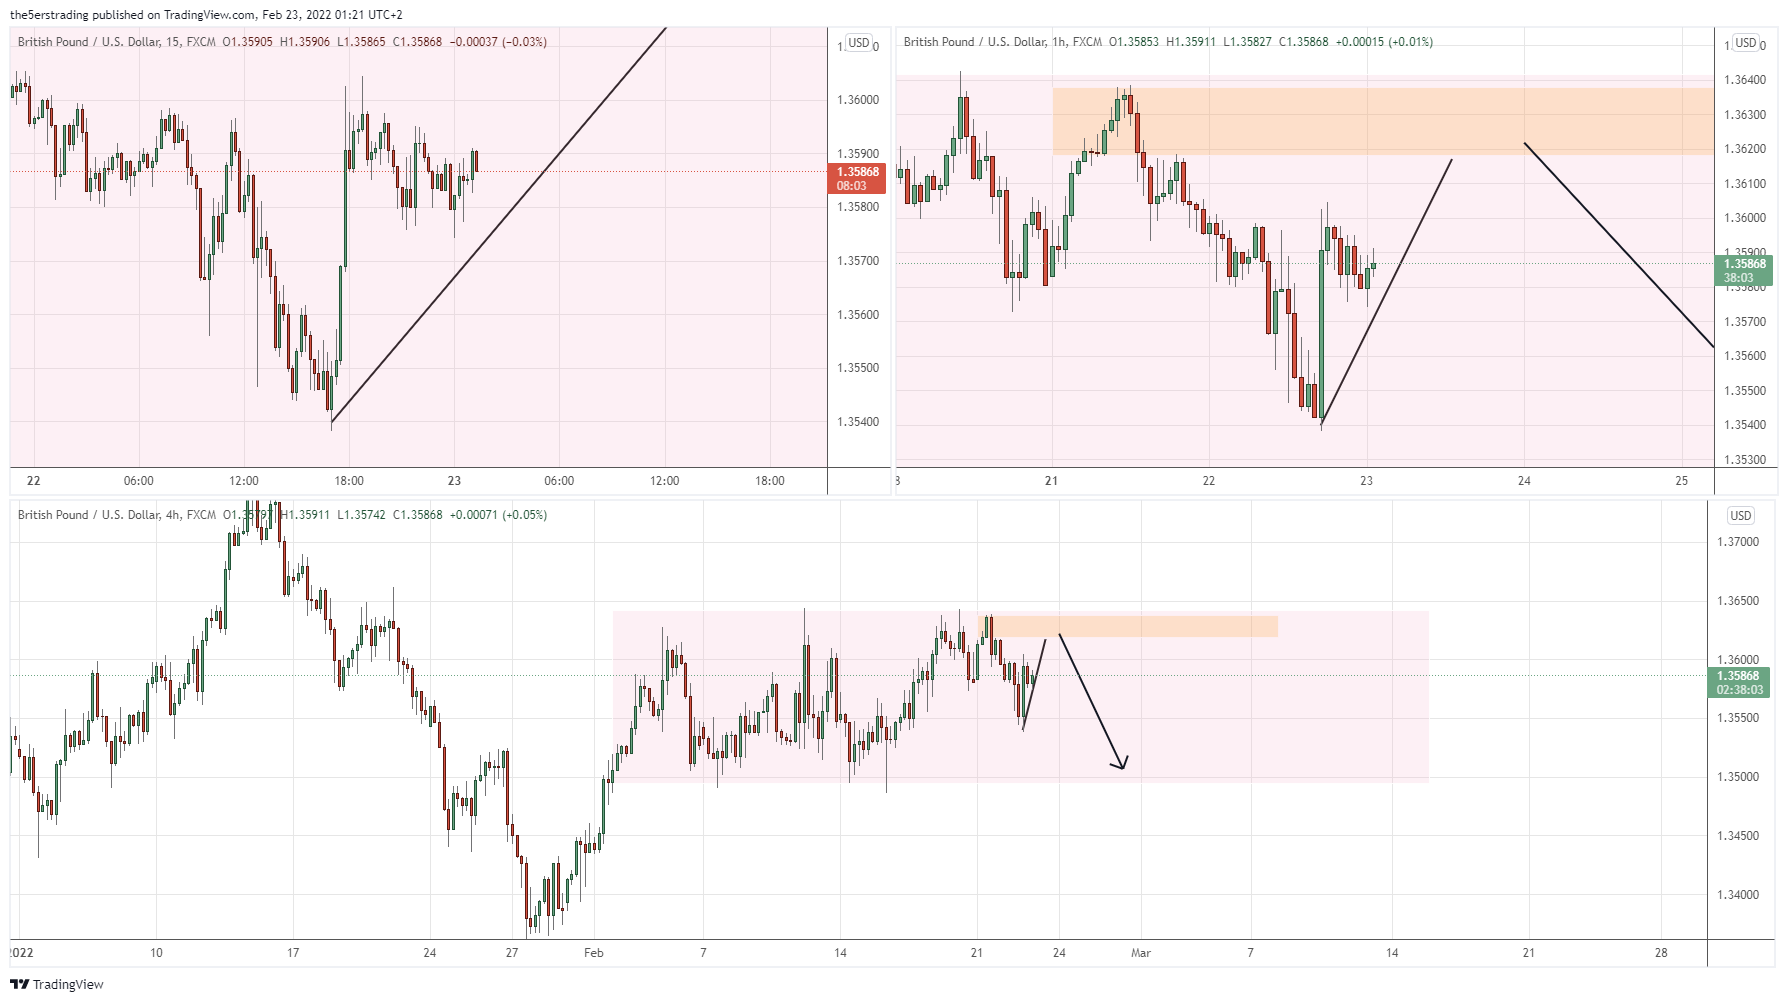 GBP/USD H4 Supply and Demand